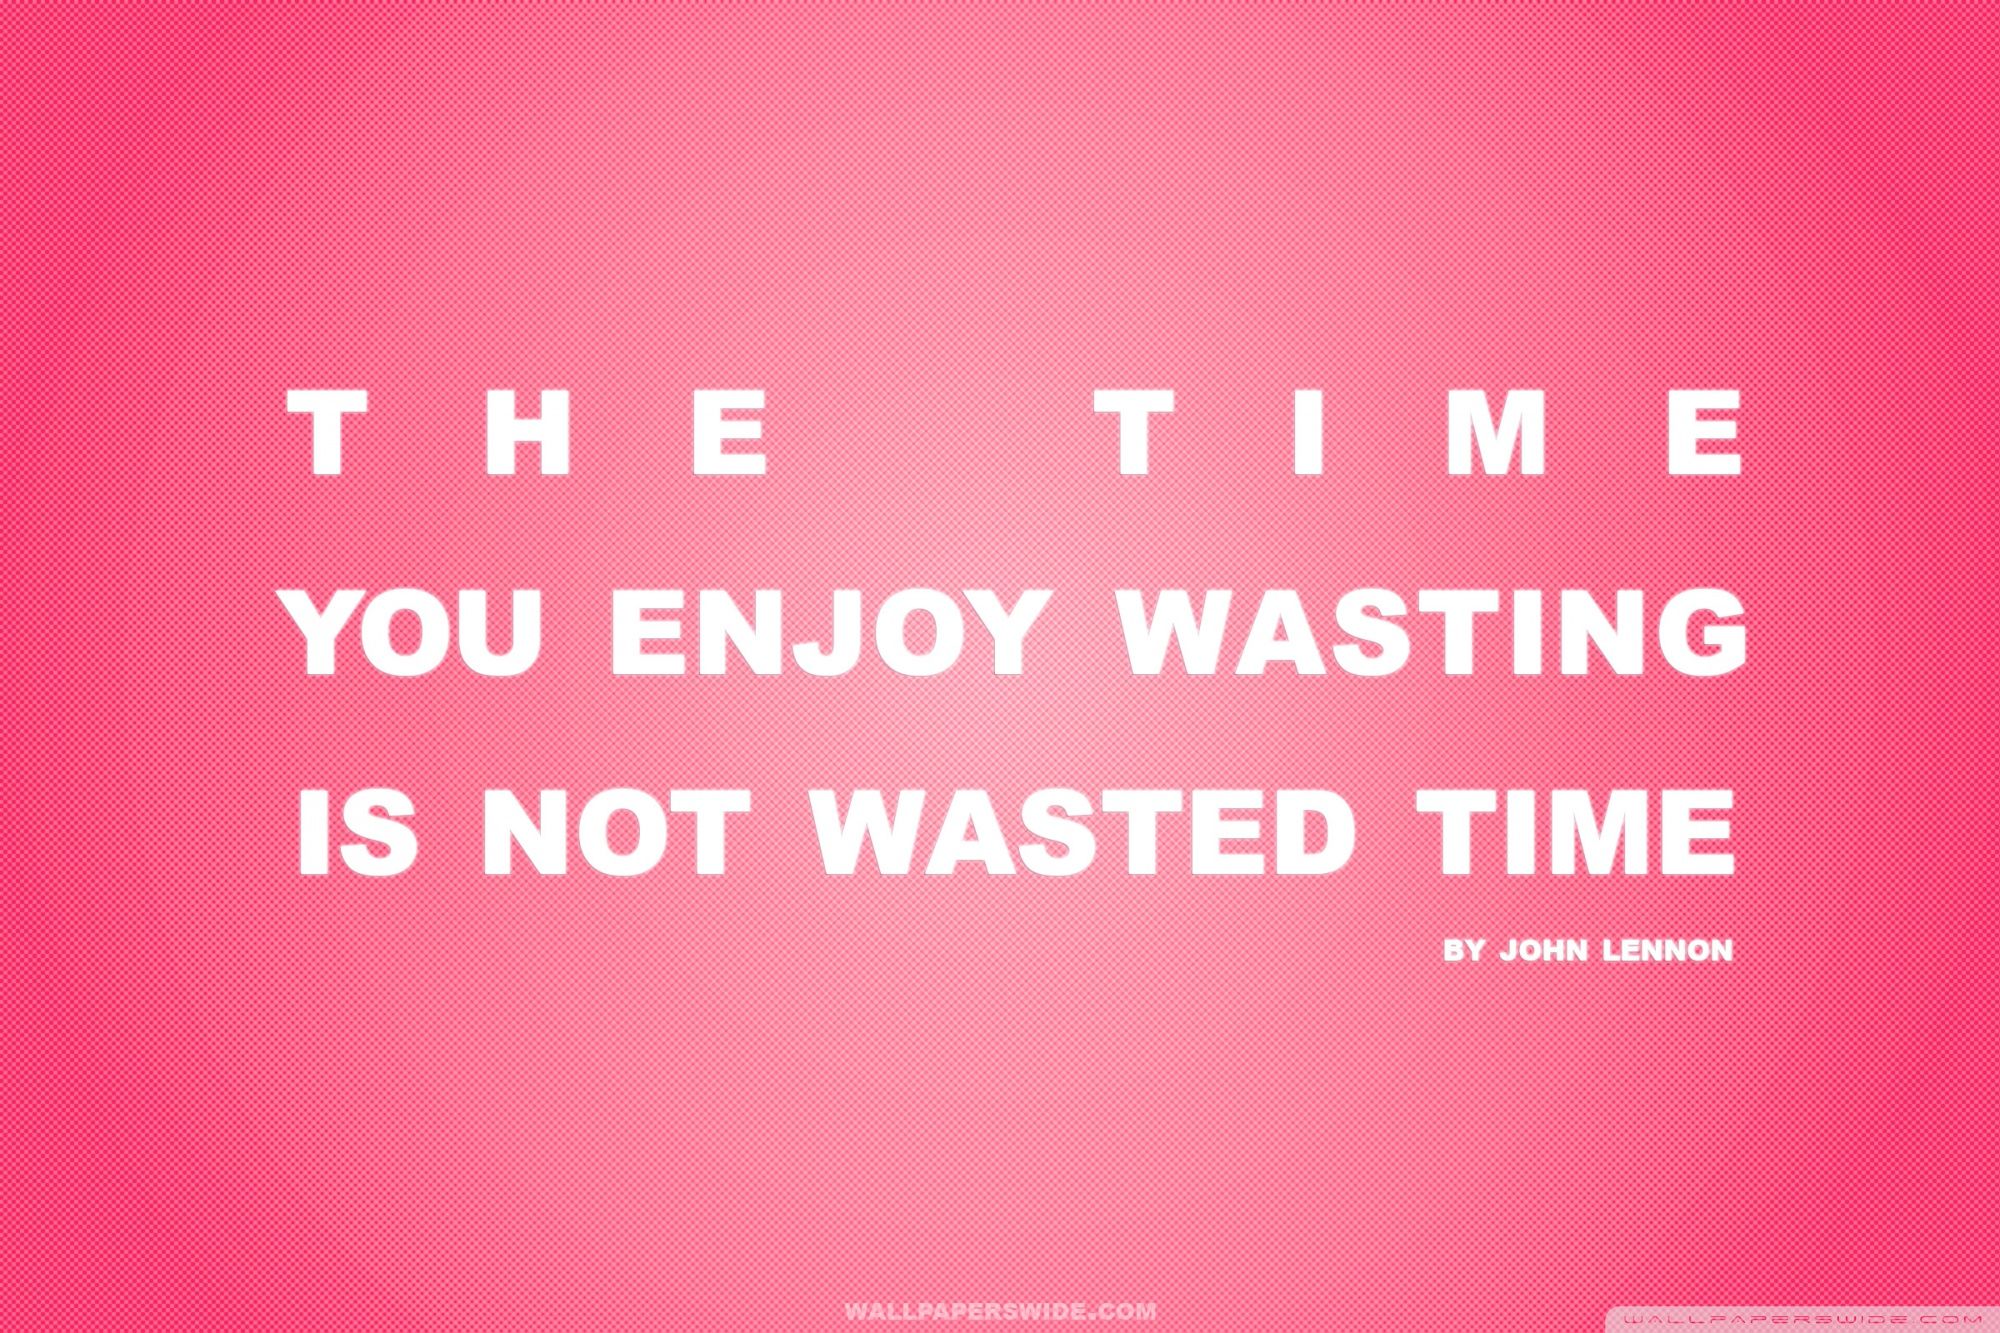 Time You Enjoy Wasting is Not Wasted Time Quote (Retro Pink) Ultra HD Desktop Background Wallpaper for 4K UHD TV, Widescreen & UltraWide Desktop & Laptop, Tablet